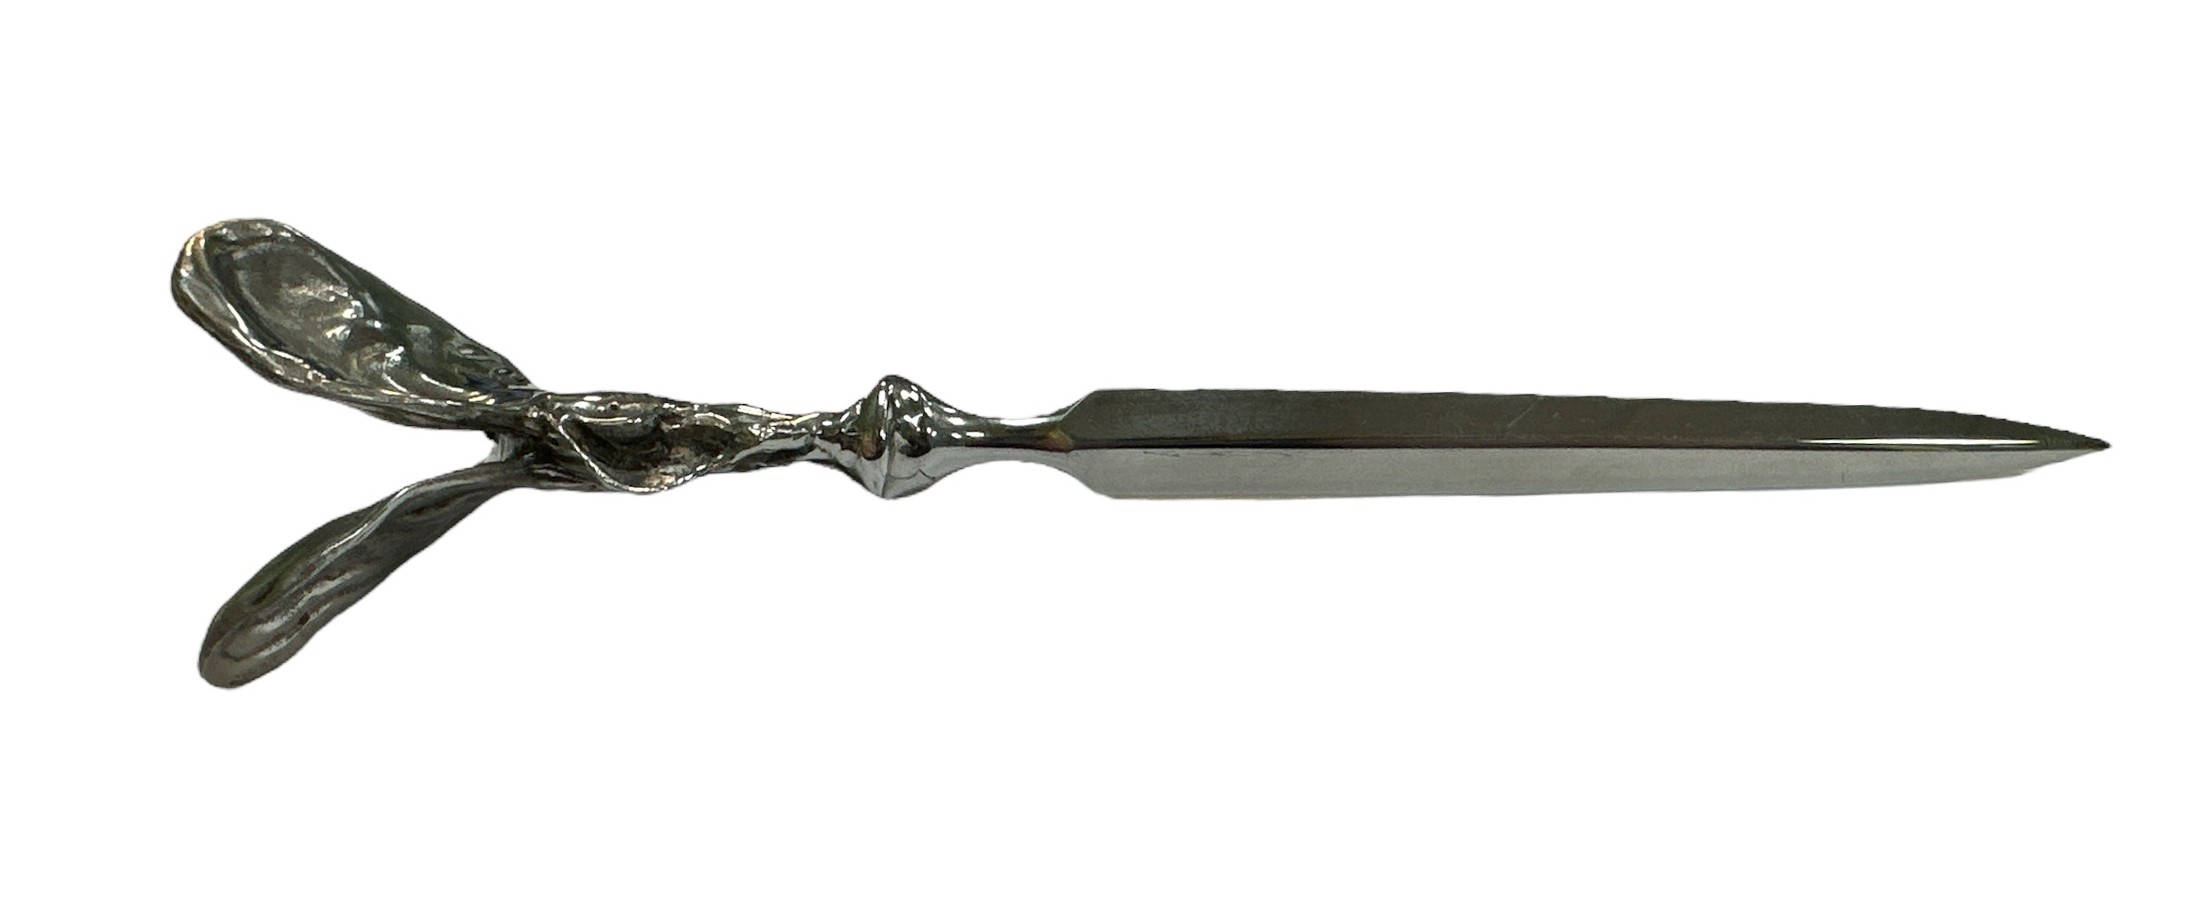 Rolls Royce limited edition Spirit of Ecstasy showroom desk letter opener, as issued by Rolls - Image 3 of 3